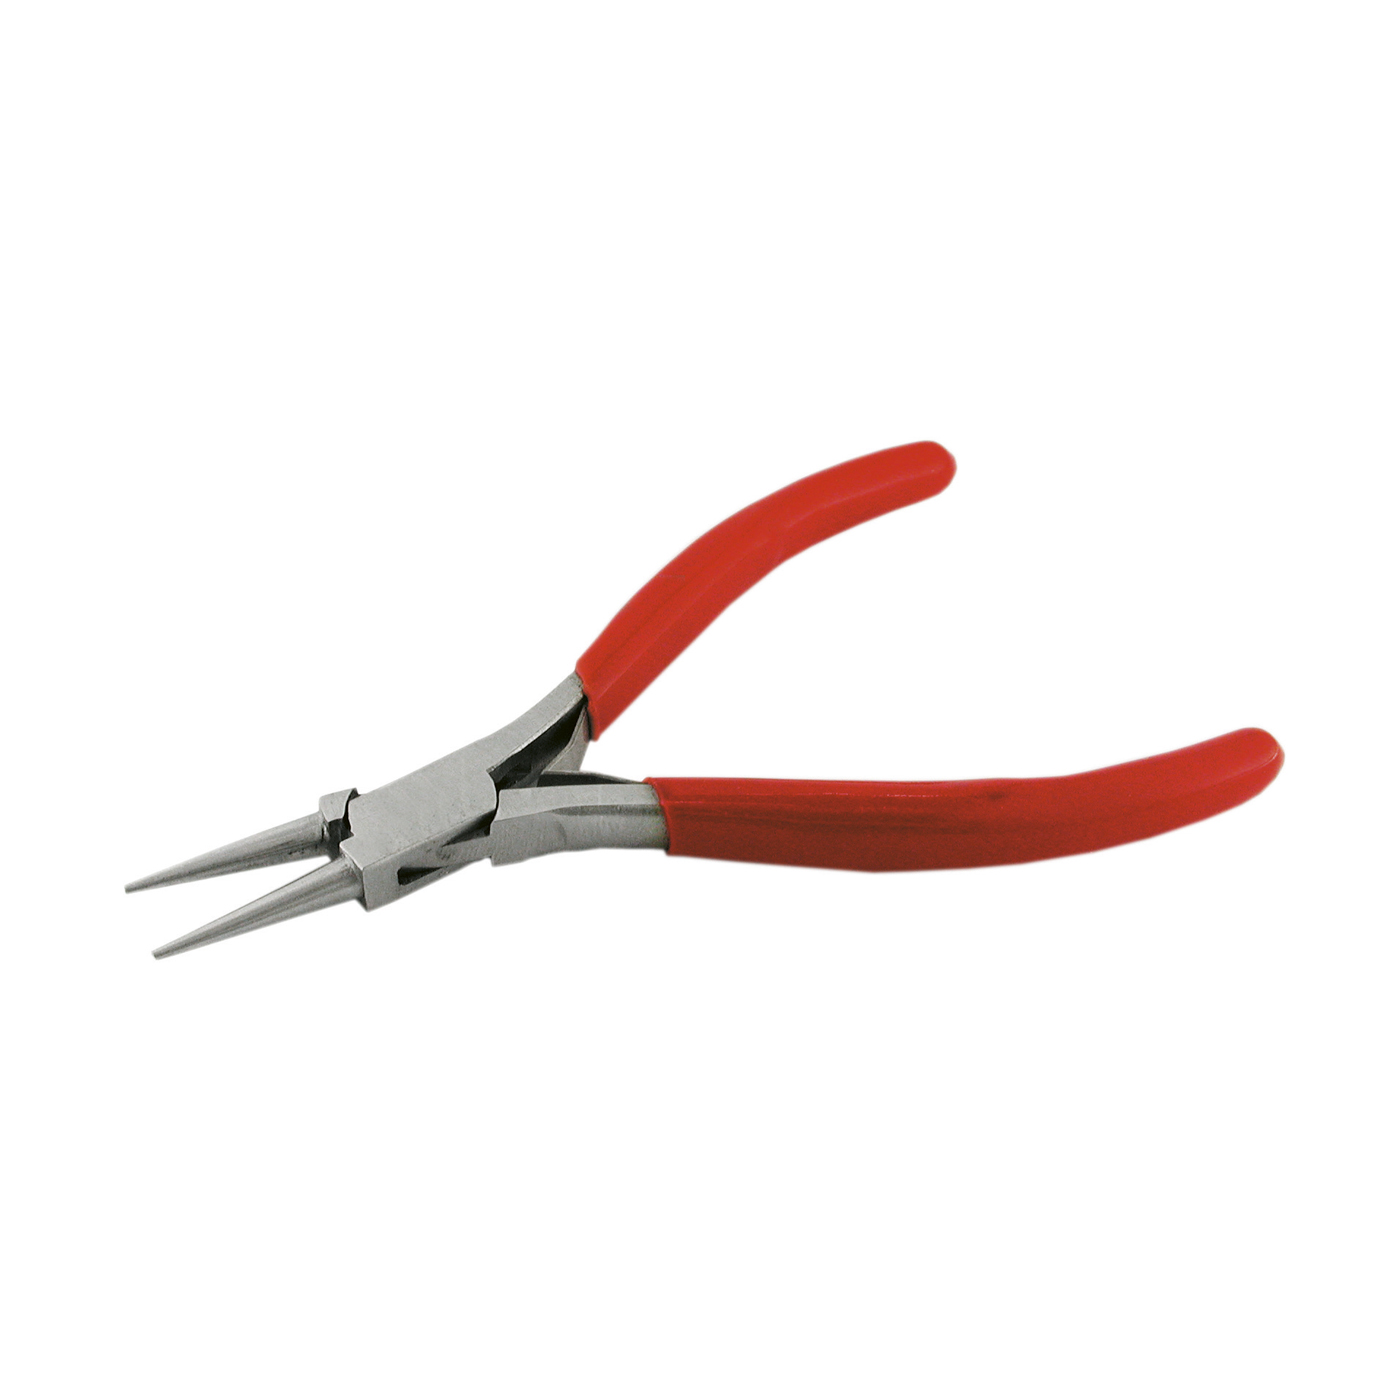 Roand Pointed Pliers, Stahl, 115 mm,with Spring,without Blow - 1 piece